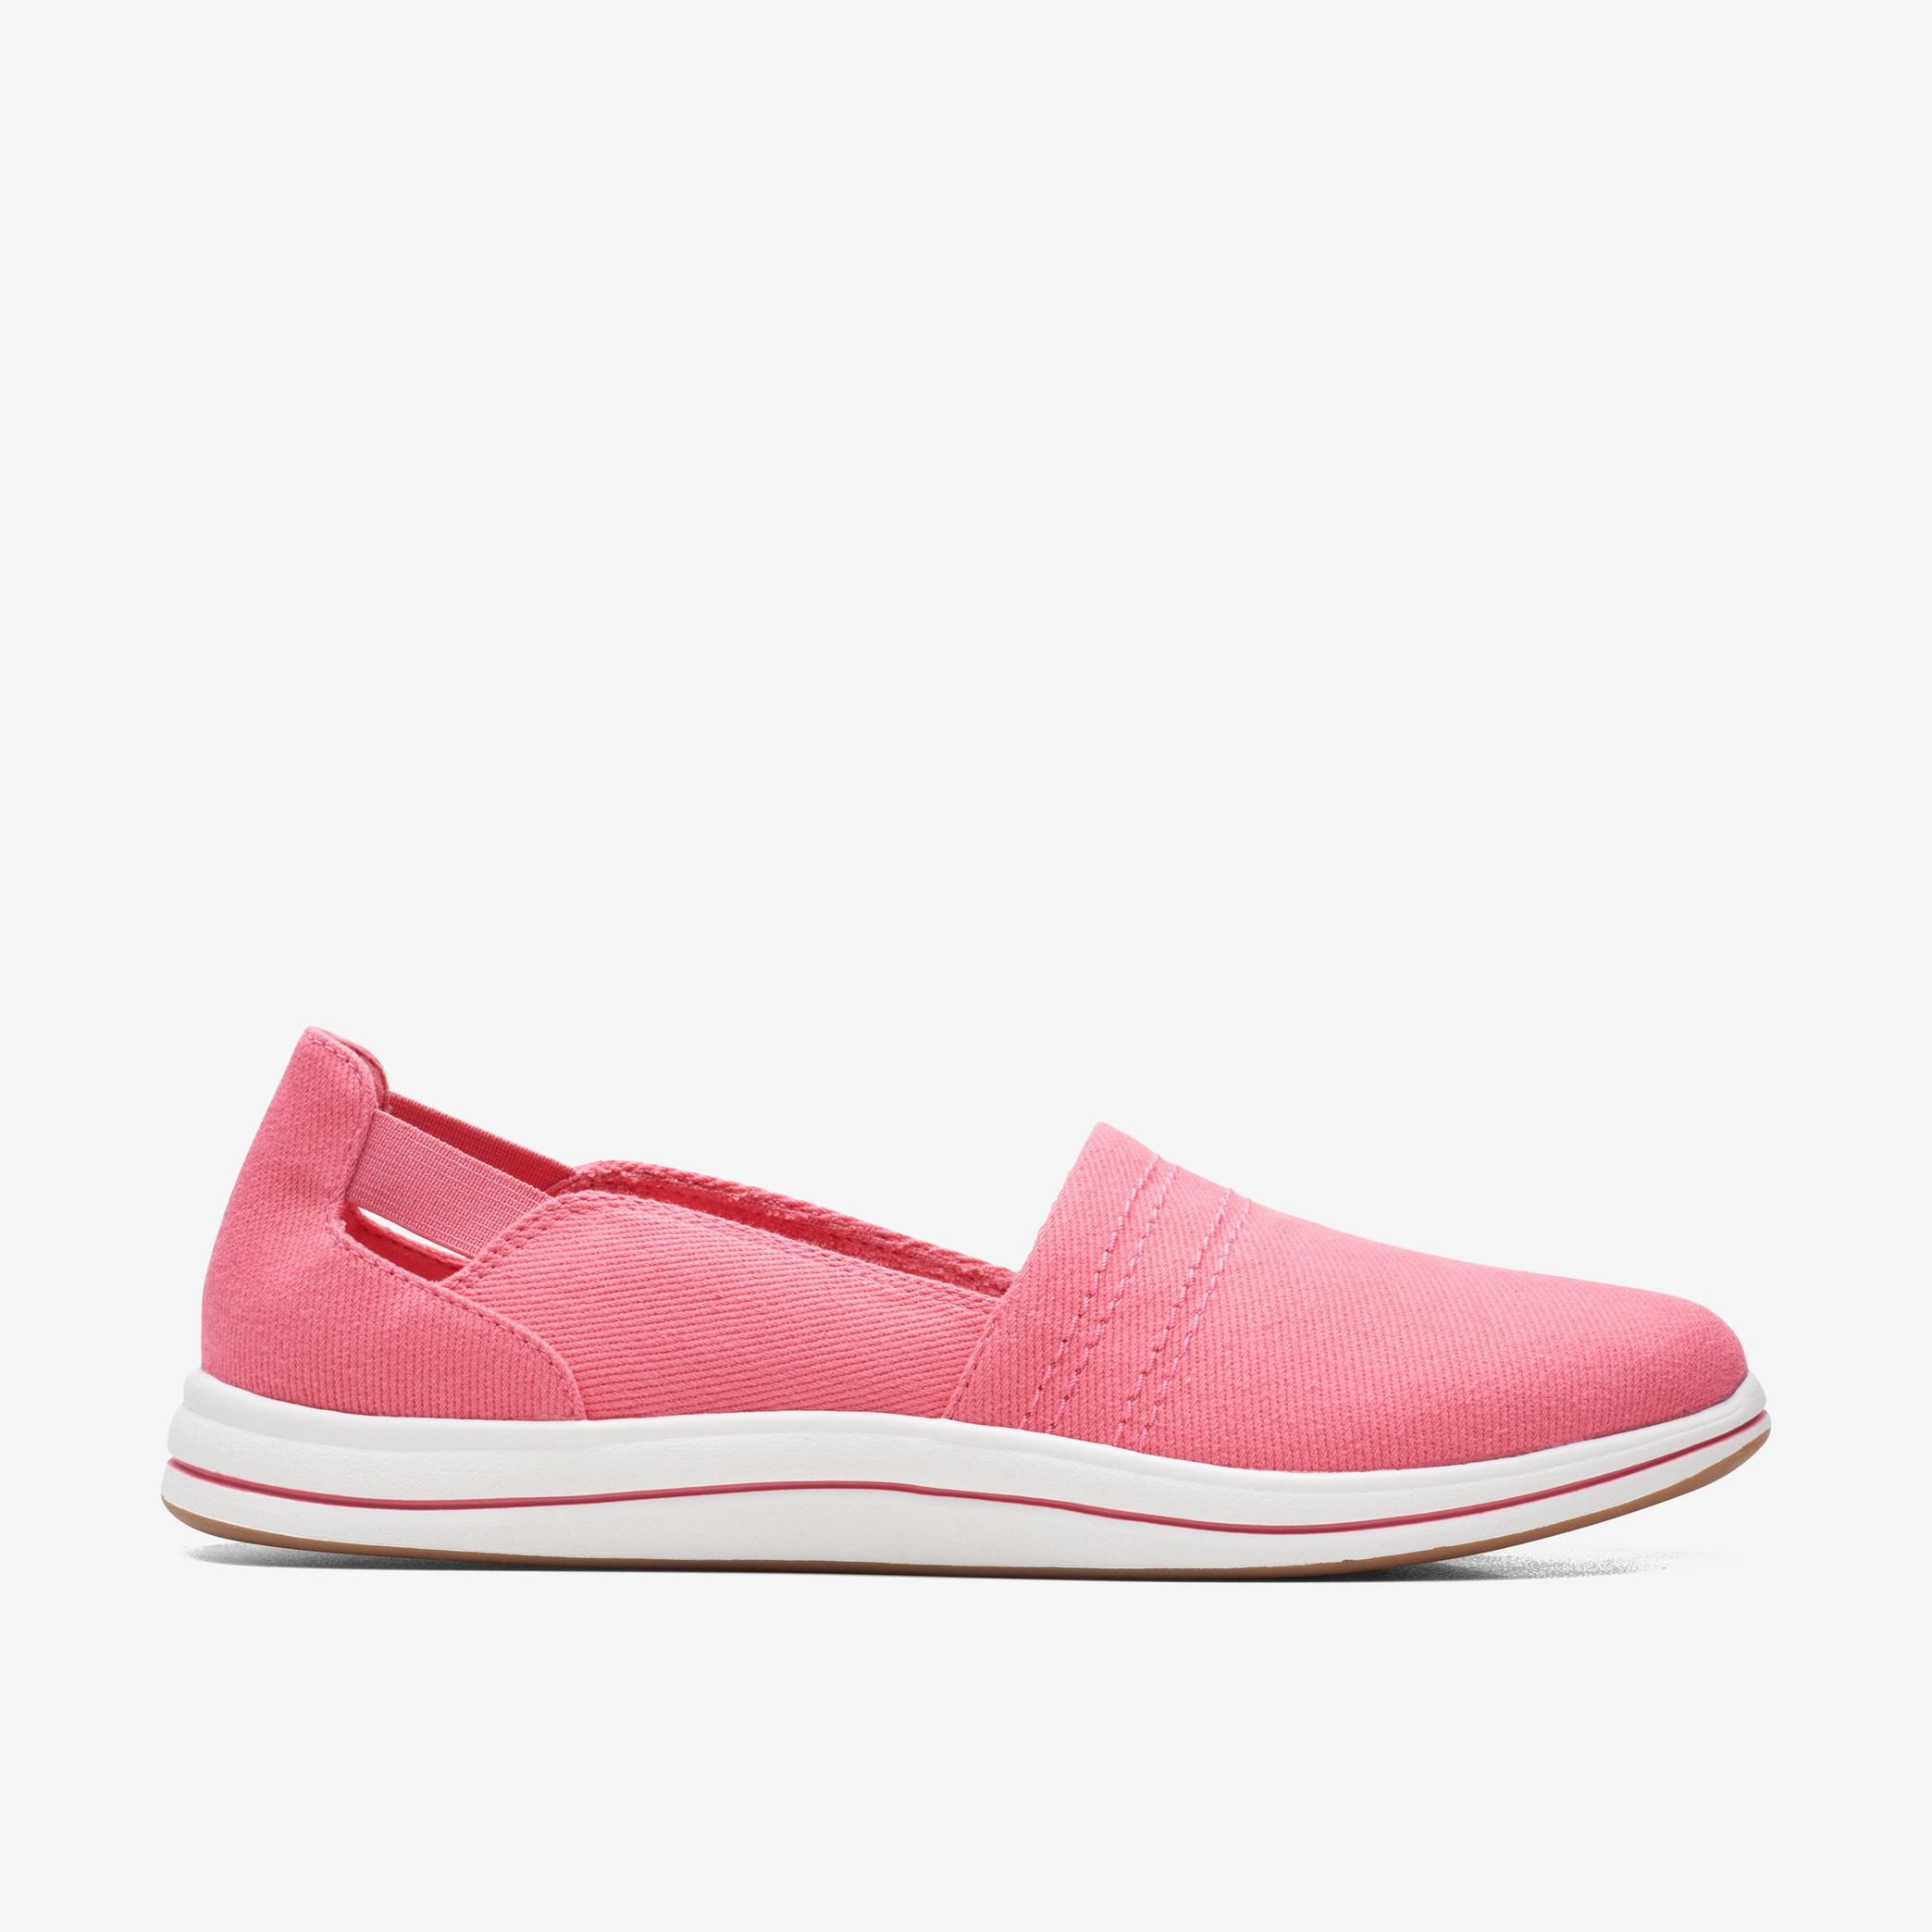 WOMENS Brinkley Step Coral Trouser Shoes | Clarks Outlet